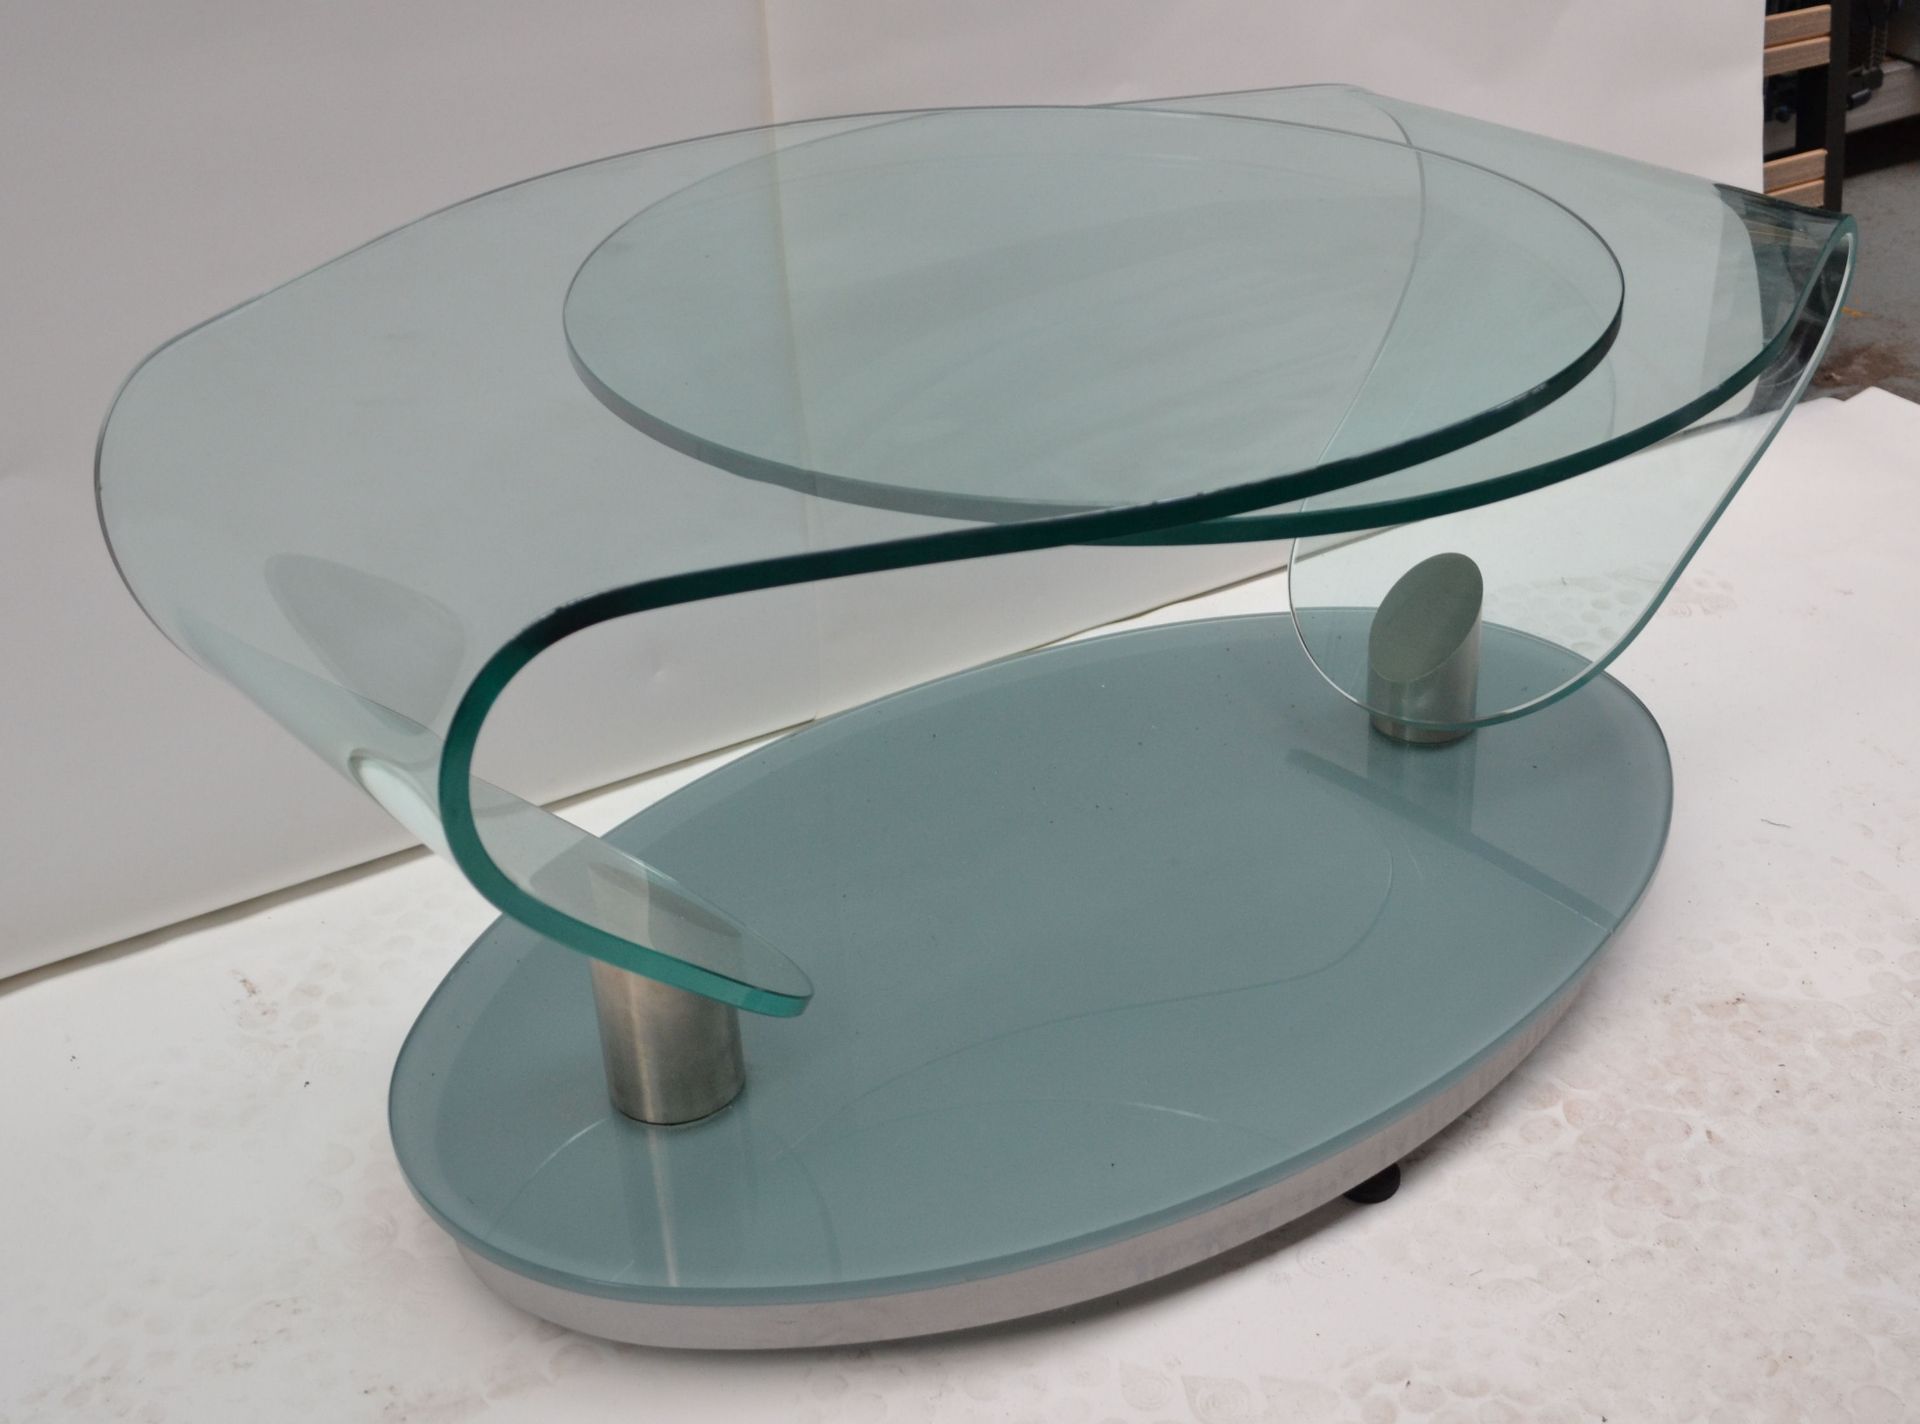 1 x Contemporary Swivelling Glass Coffee Table - AE007 - CL007 - Location: Altrincham WA14 - Image 3 of 13